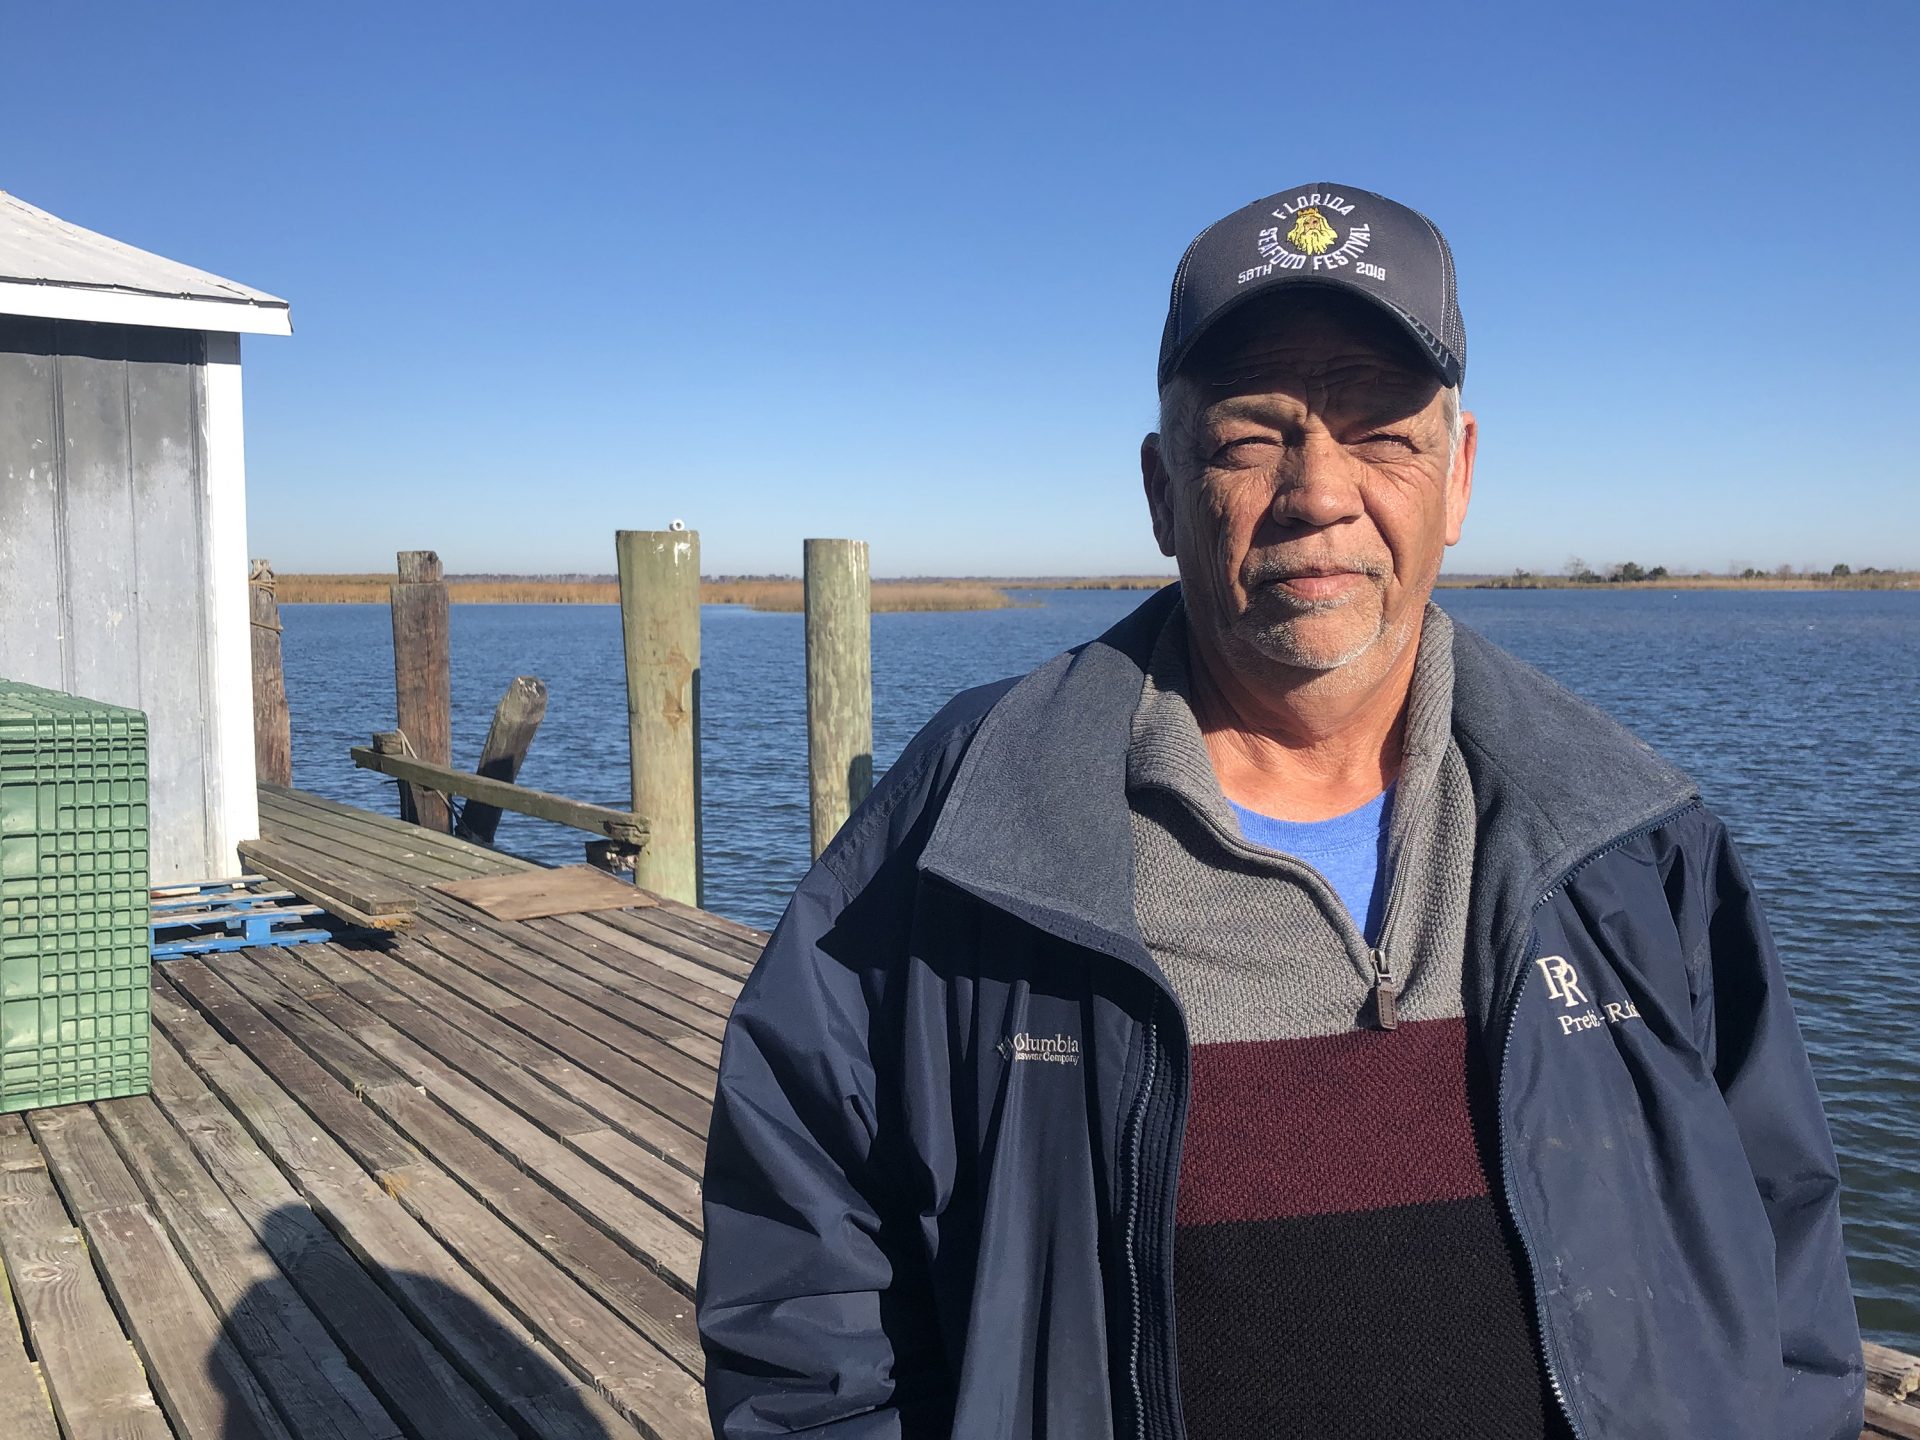 Joseph "Smokey" Parrish has worked at 13 Mile Seafood for 37 years. He oversees the wholesale shrimp operation and is also a Franklin County commissioner. He says nearly 5,000 jobs are at stake if the fisheries here collapse.